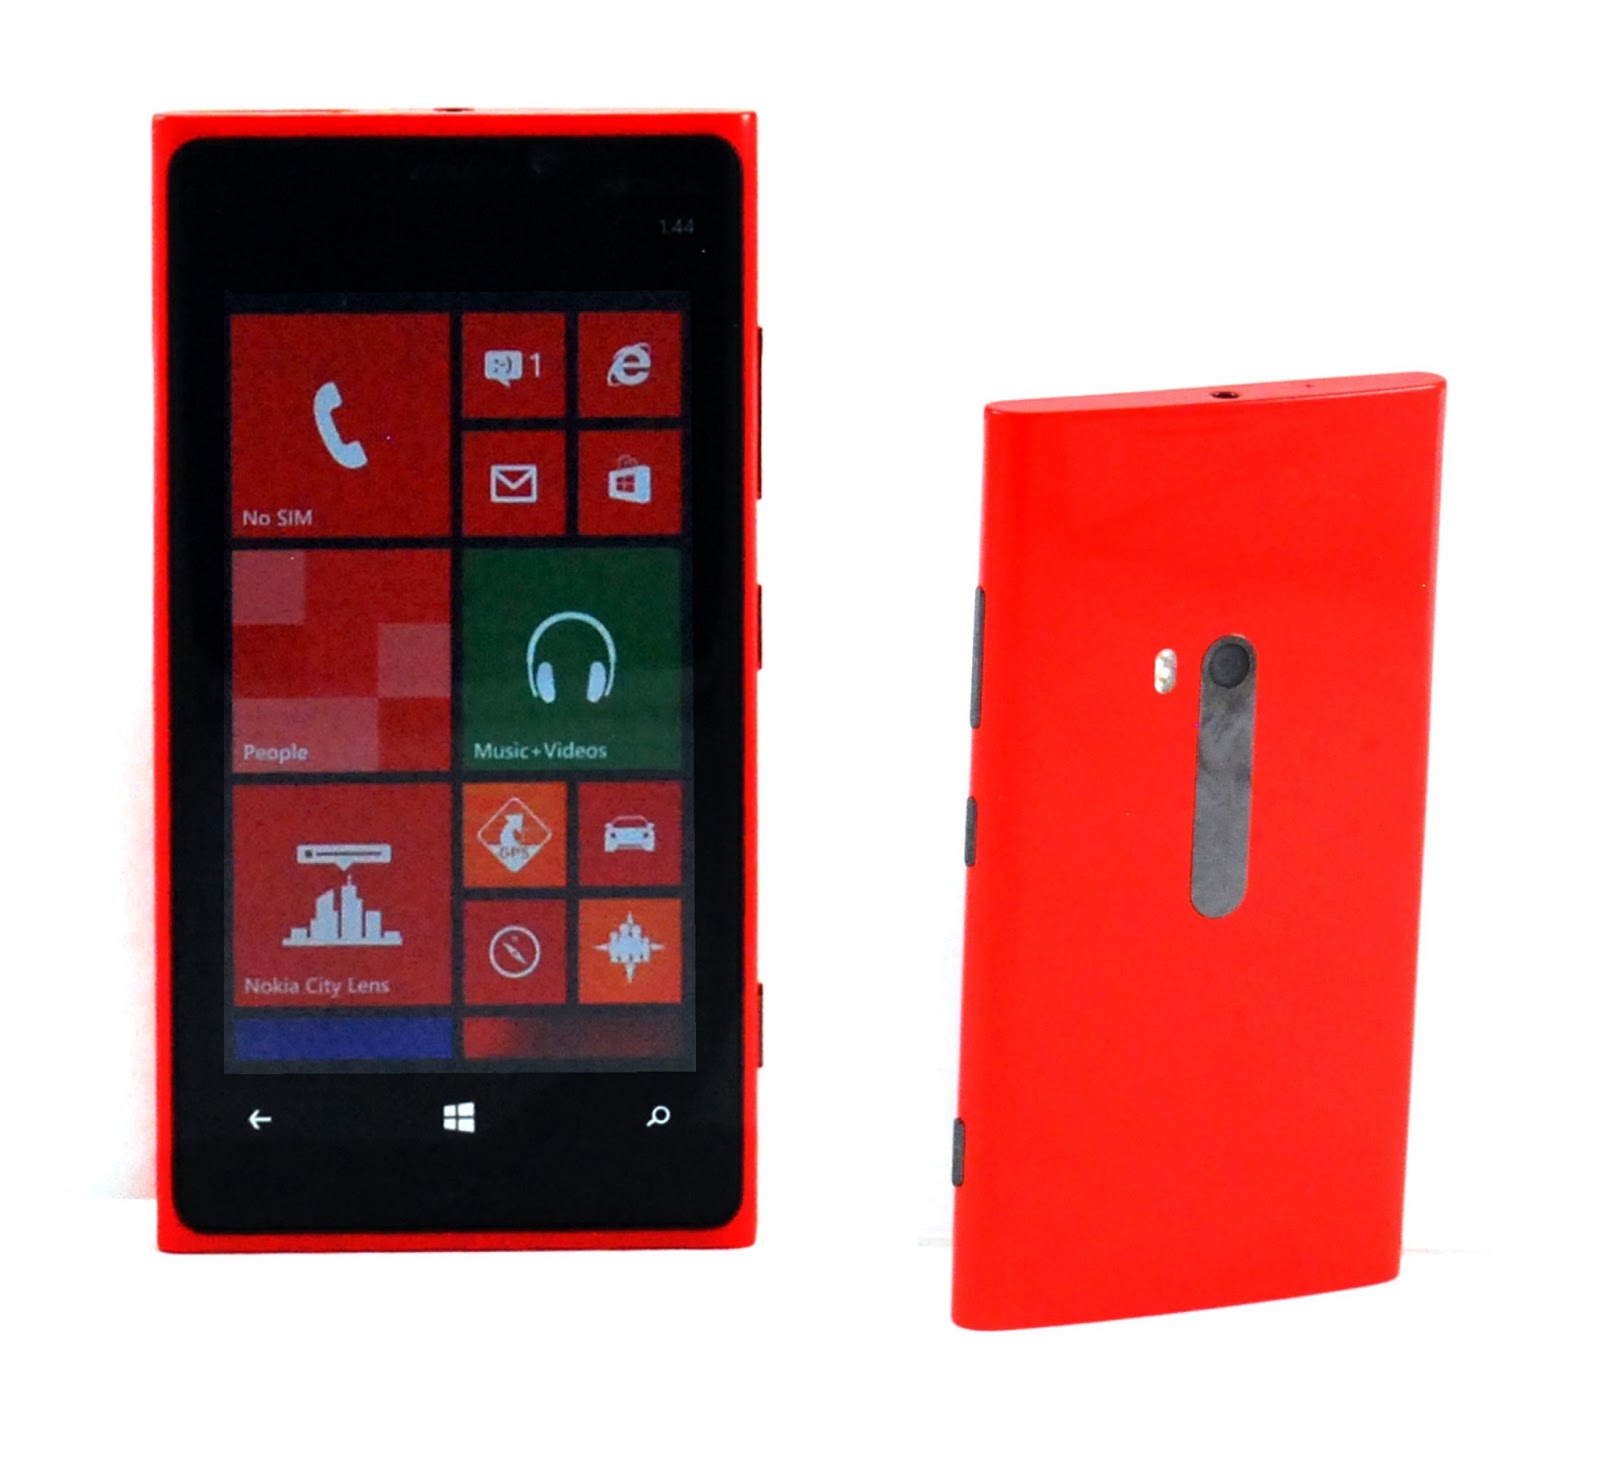 Zhee's Cell Nokia Lumia 920 4G Windows Phone, Red (AT&T) Reviews